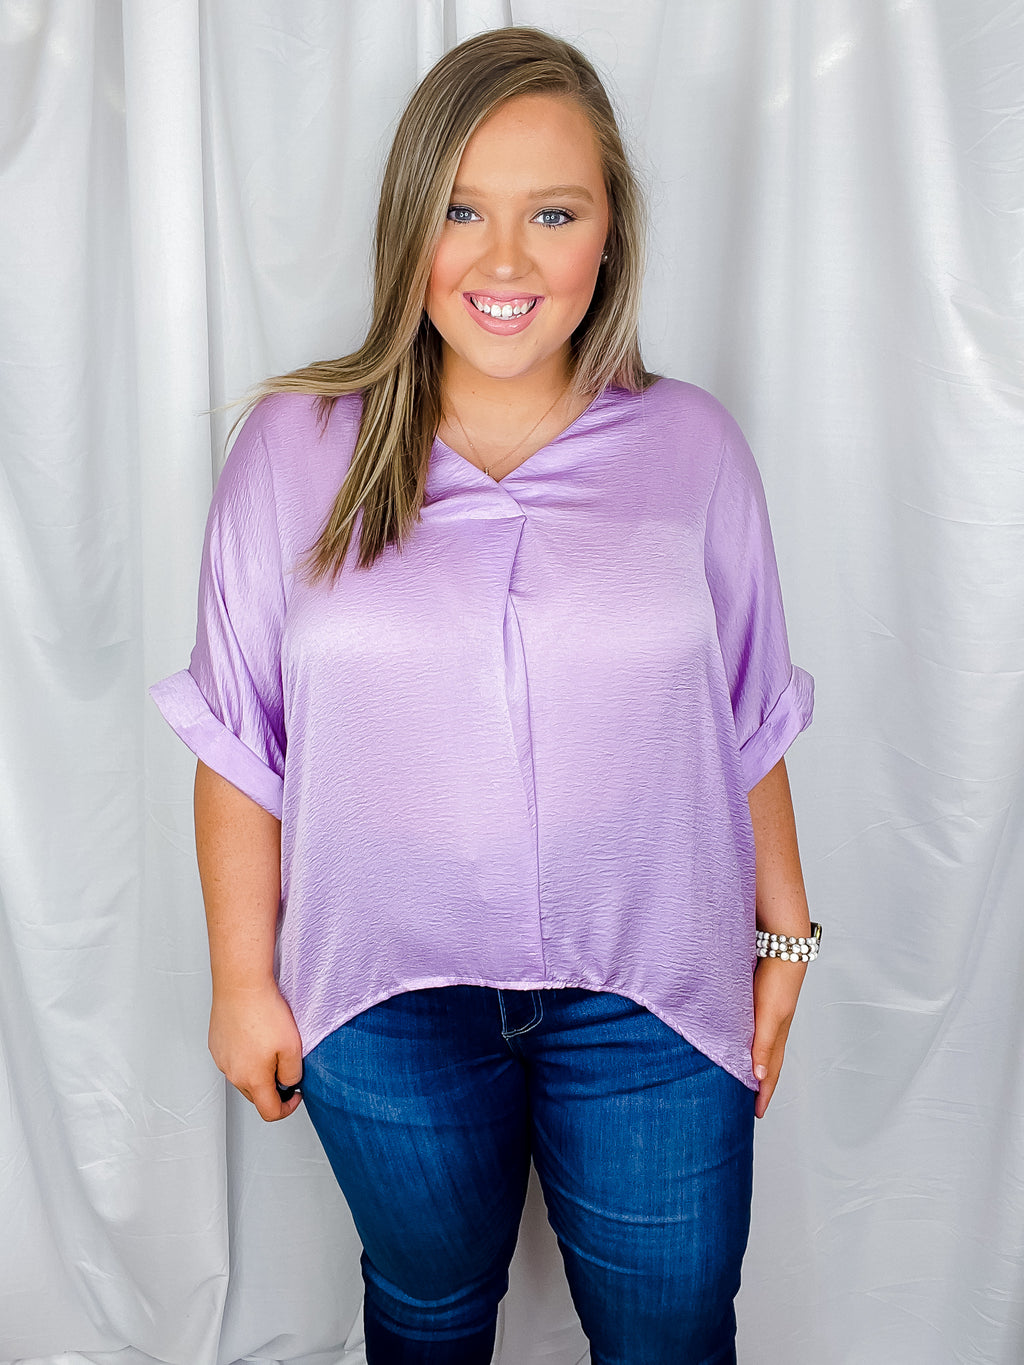 Top features a solid lavender color, V-neck line, high- low hem, cuffed short sleeves, light weight material and runs true to size! 